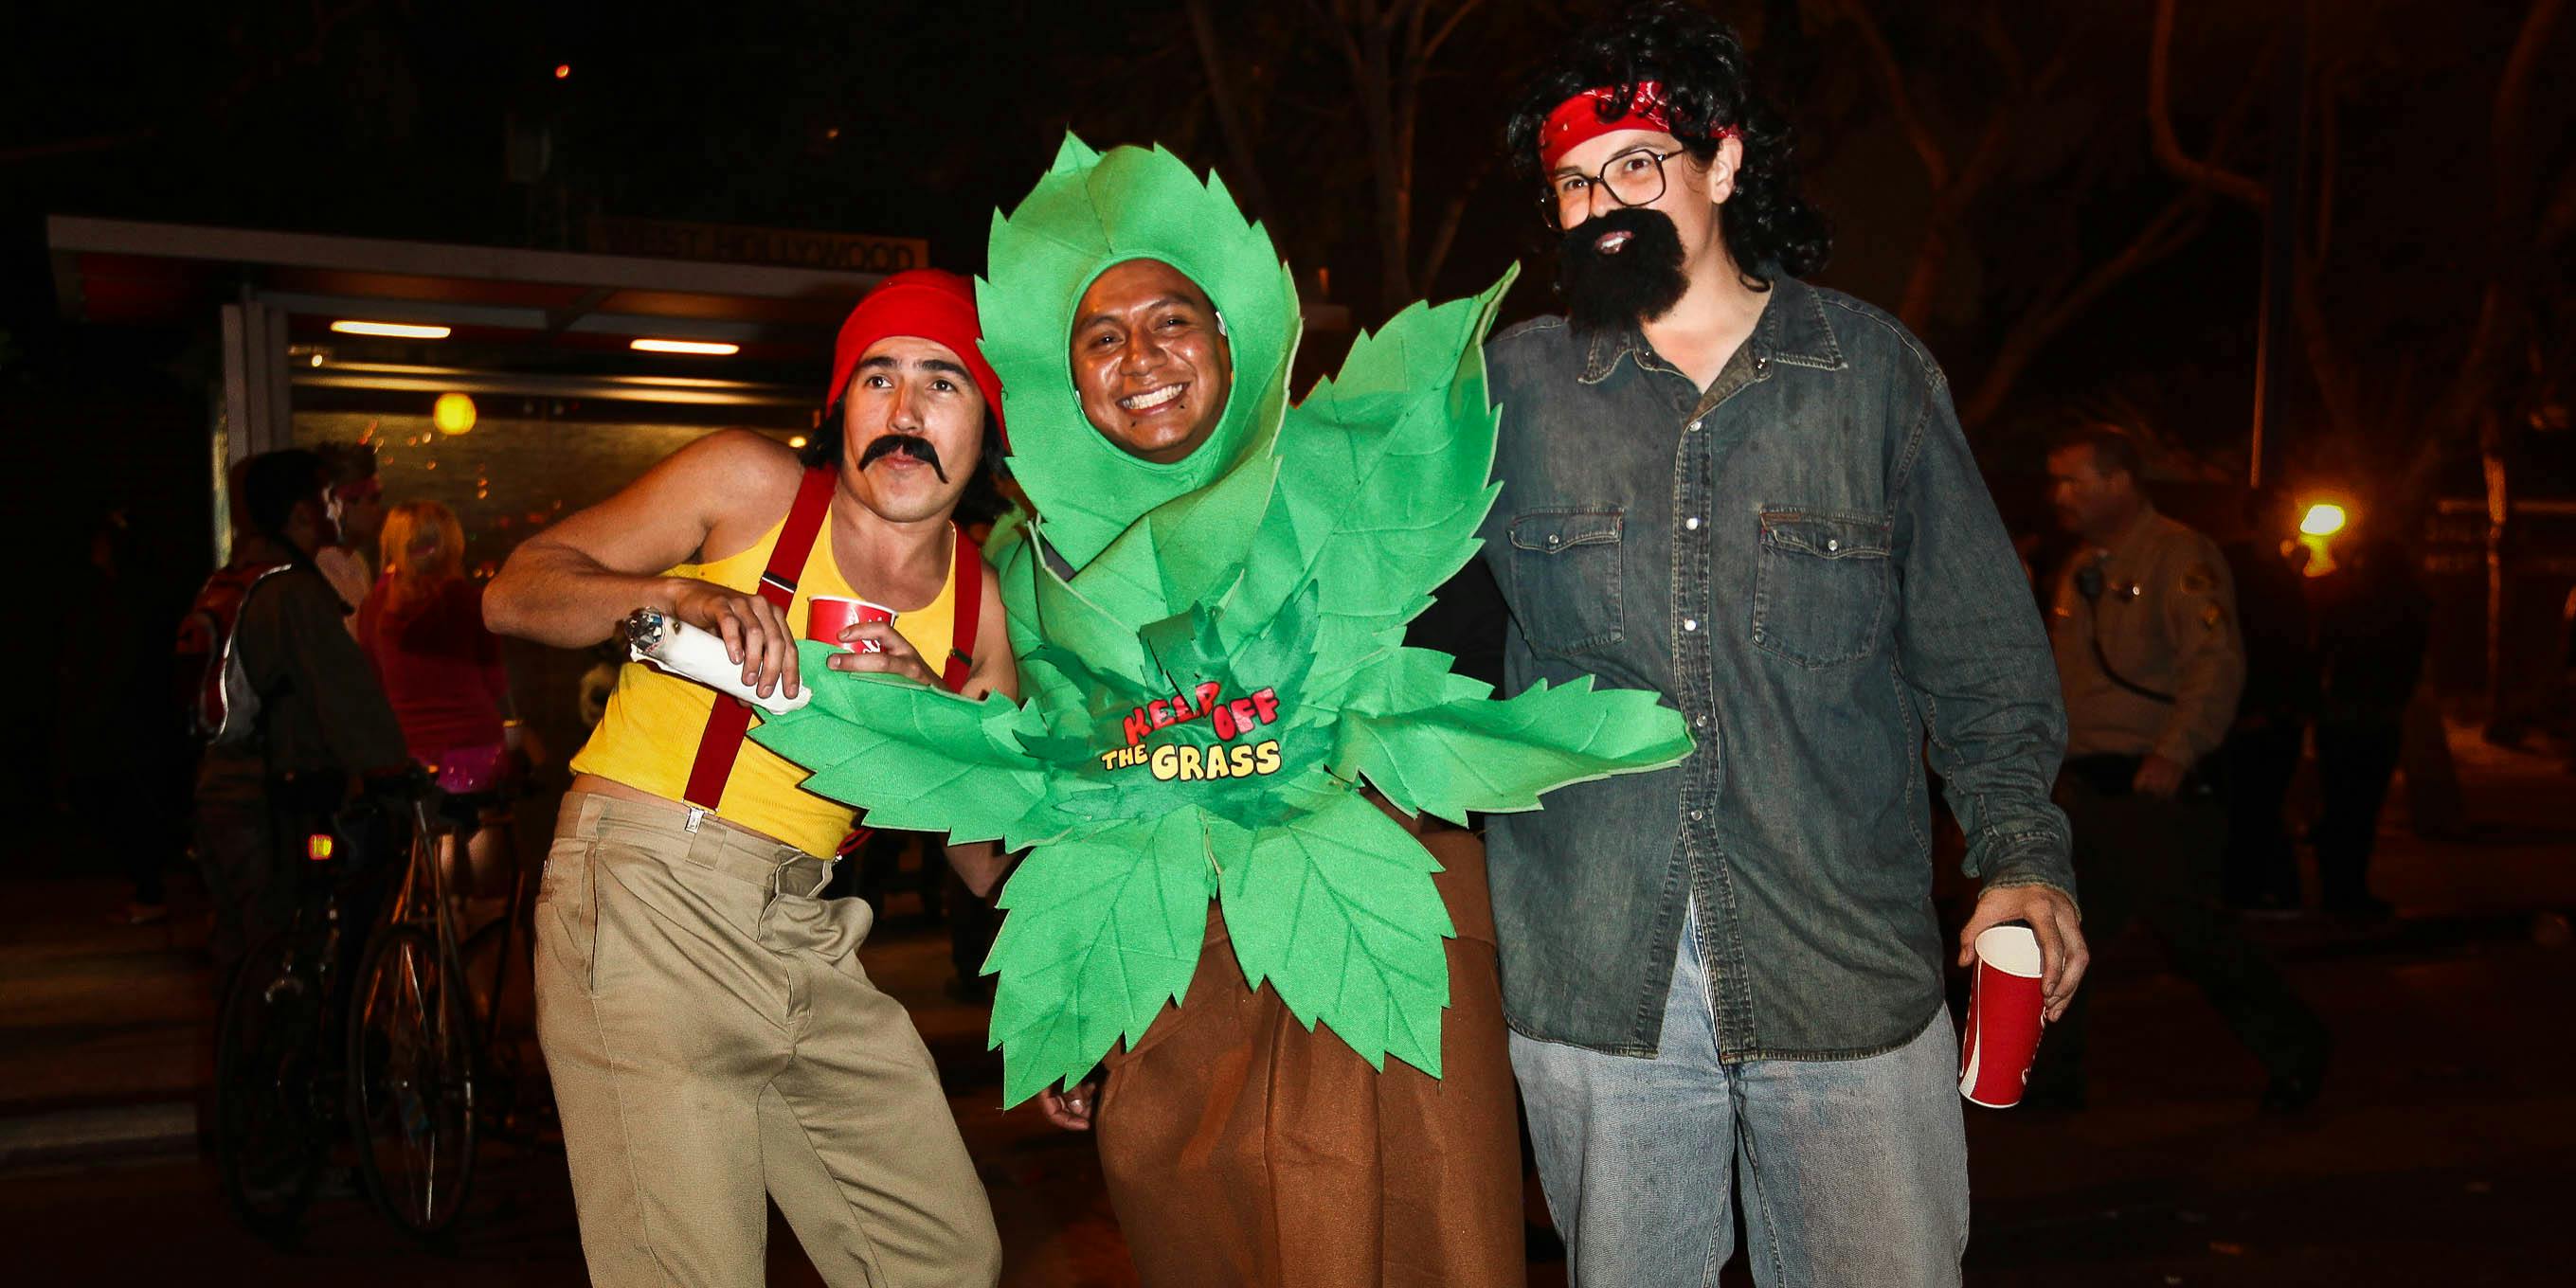 20 Easy and Hilarious Weed Halloween Costume Ideas photo pic